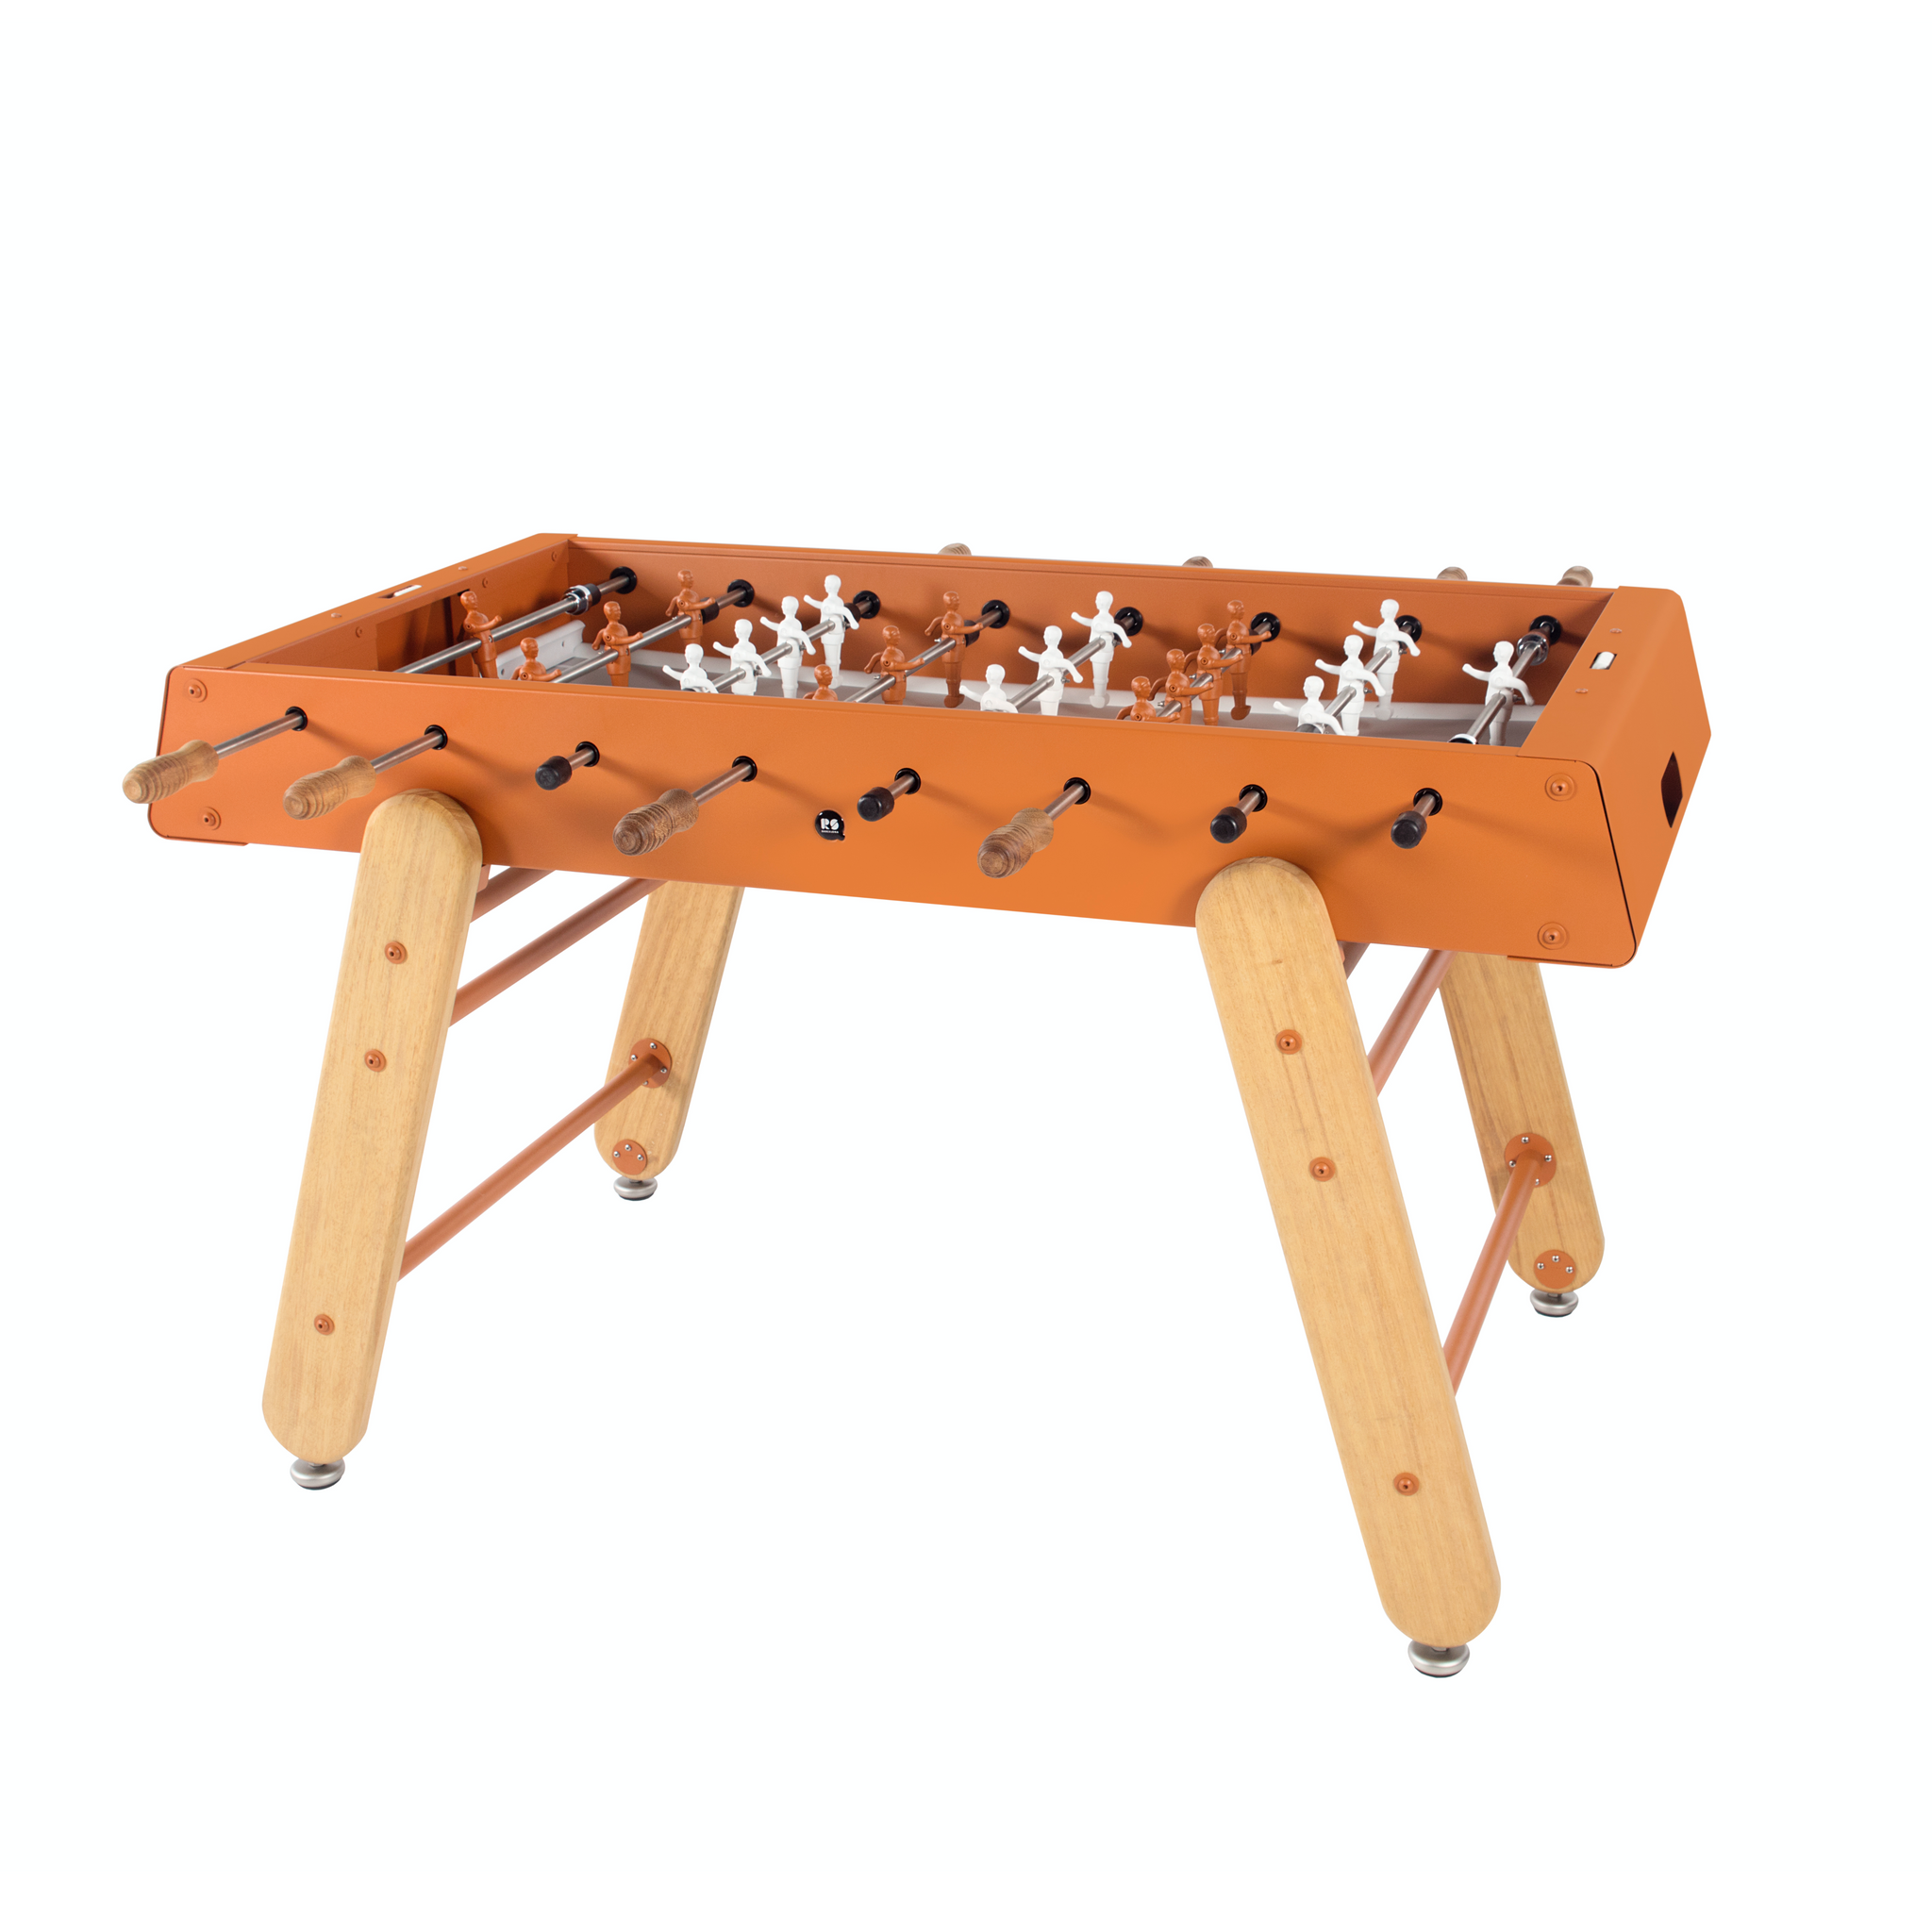 RS4 Home Wood Foosball Table in Terracotta